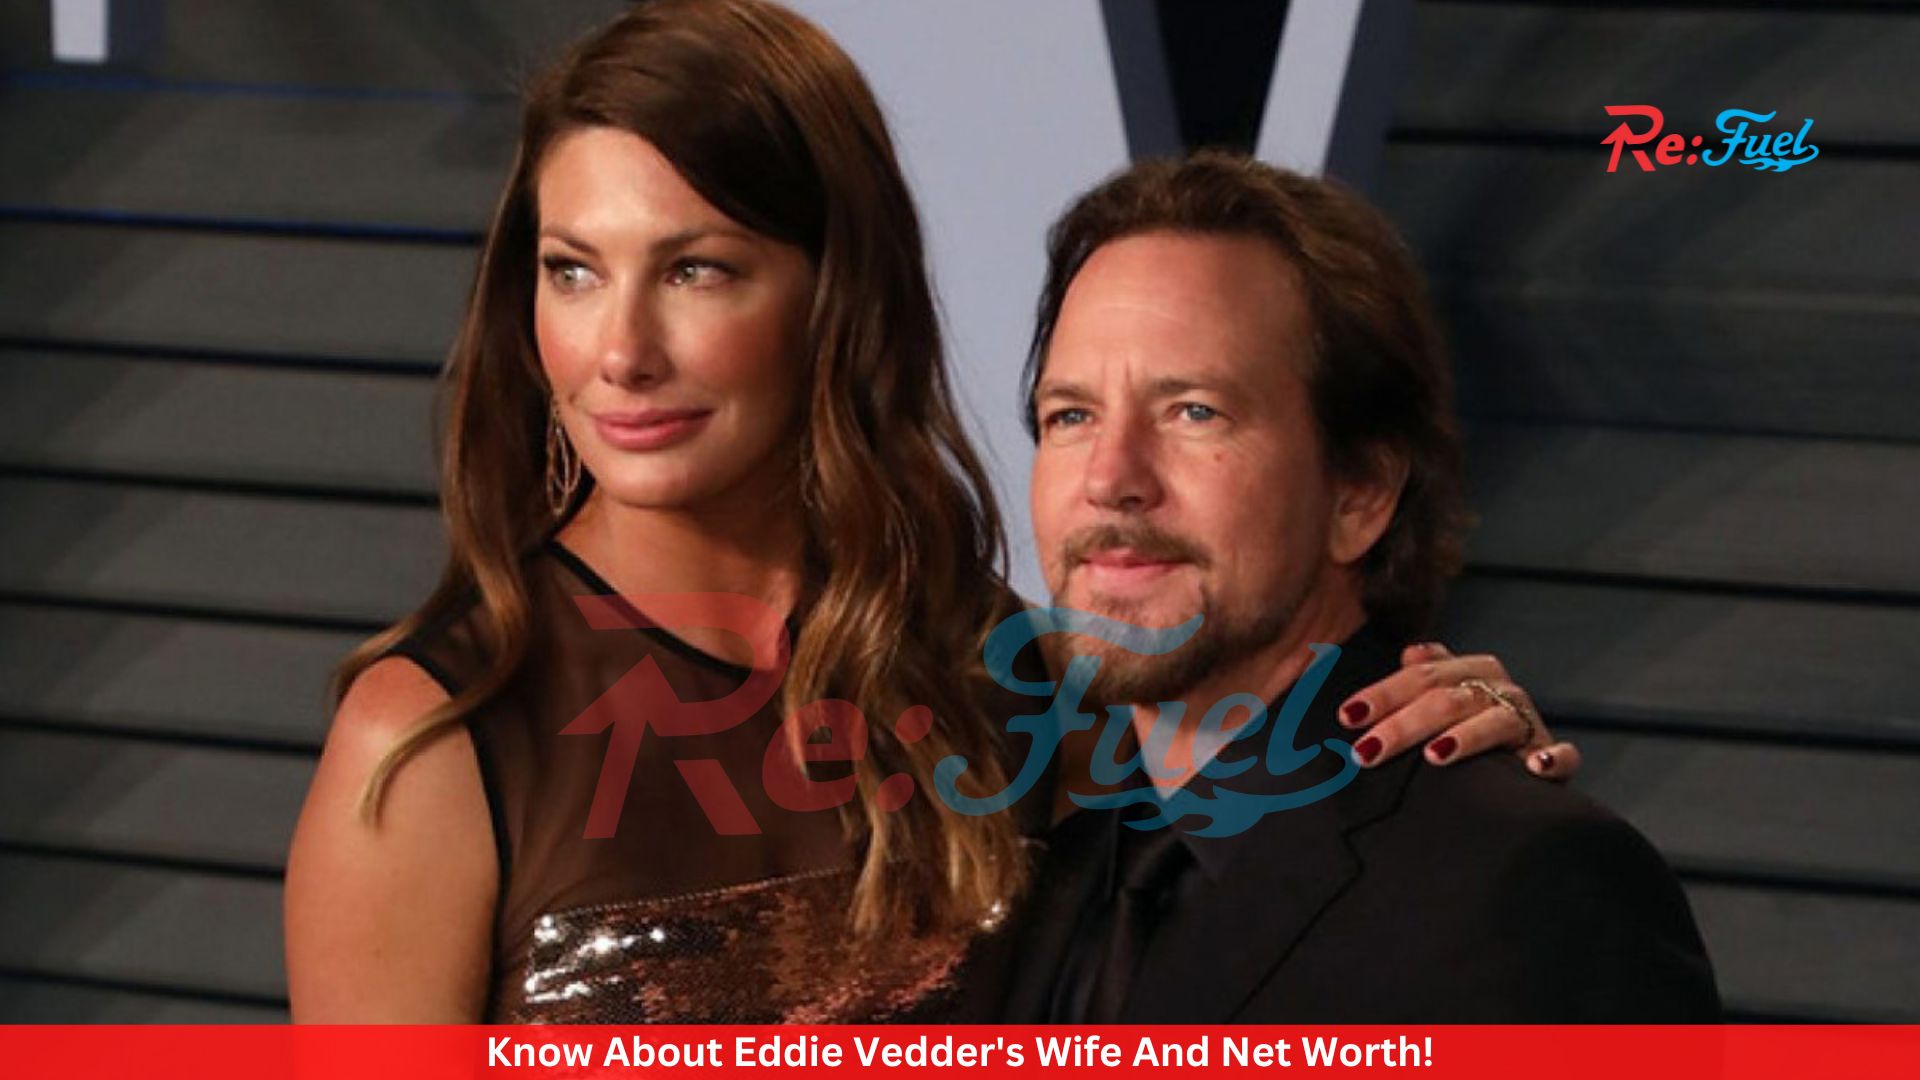 Know About Eddie Vedder's Wife And Net Worth!